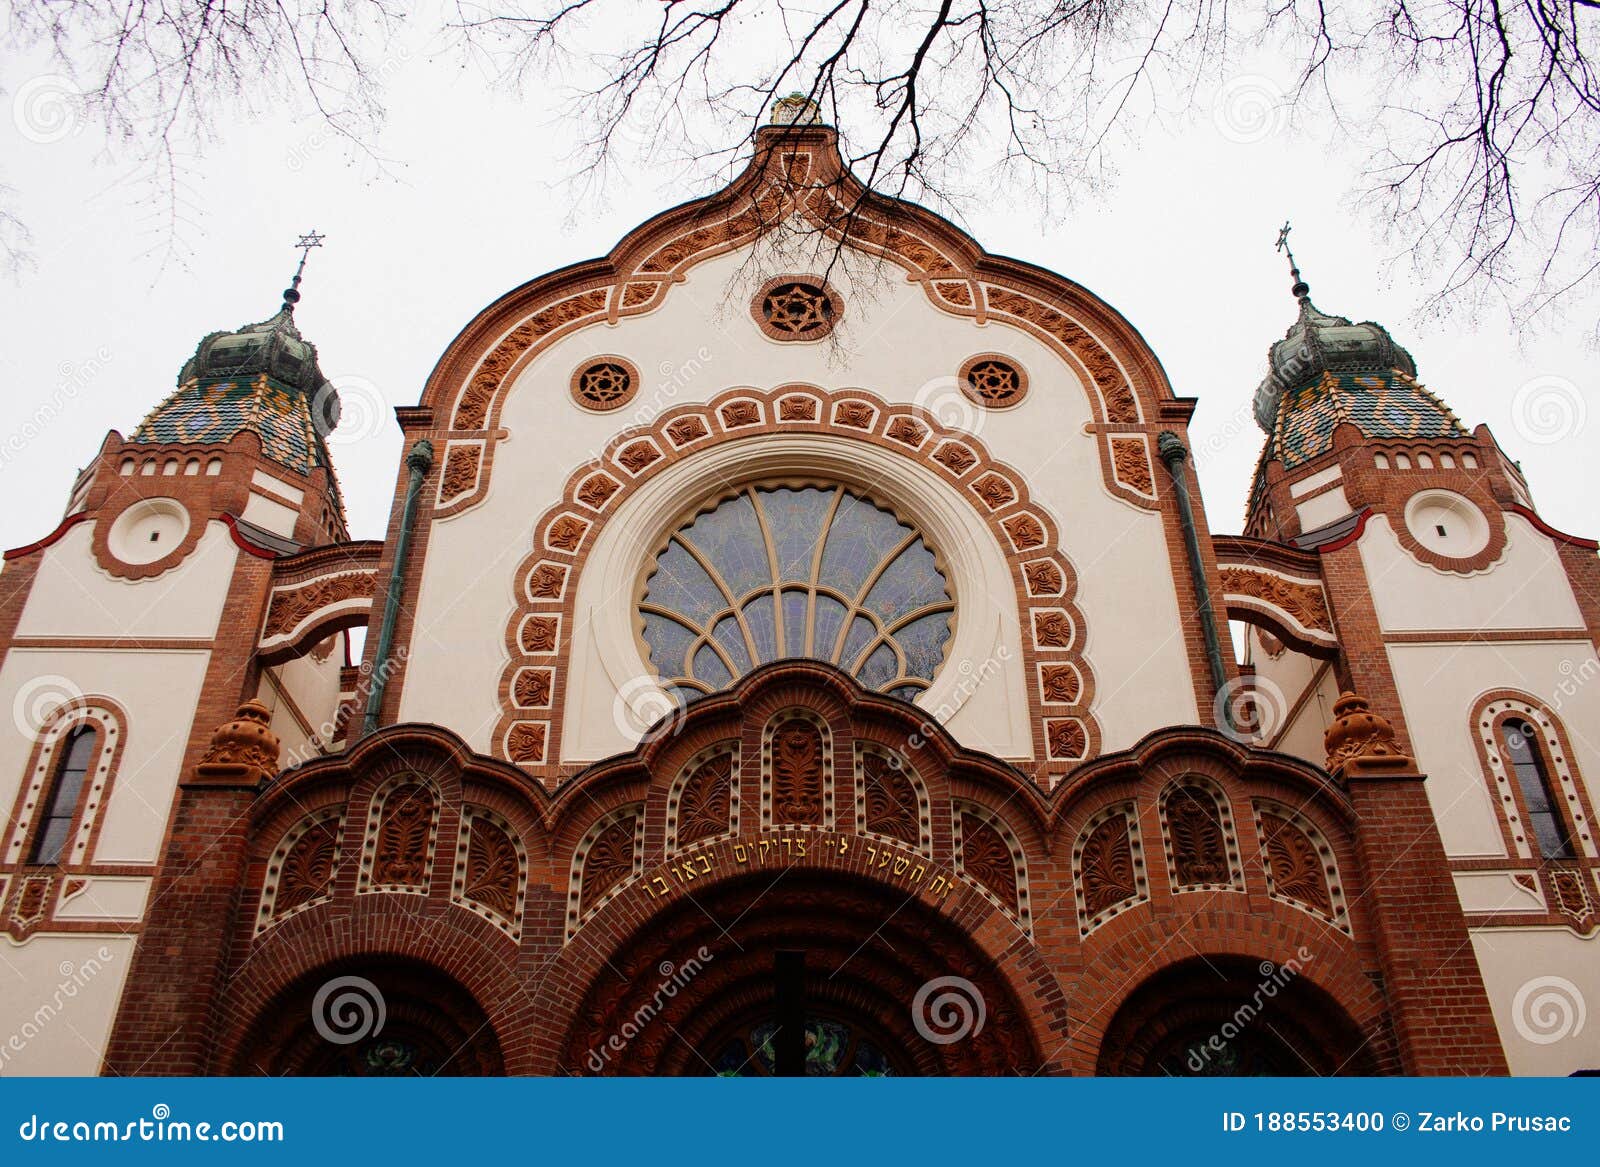 The Jakab And Komor Square Synagogue In Subotica Stock Photo Image Of